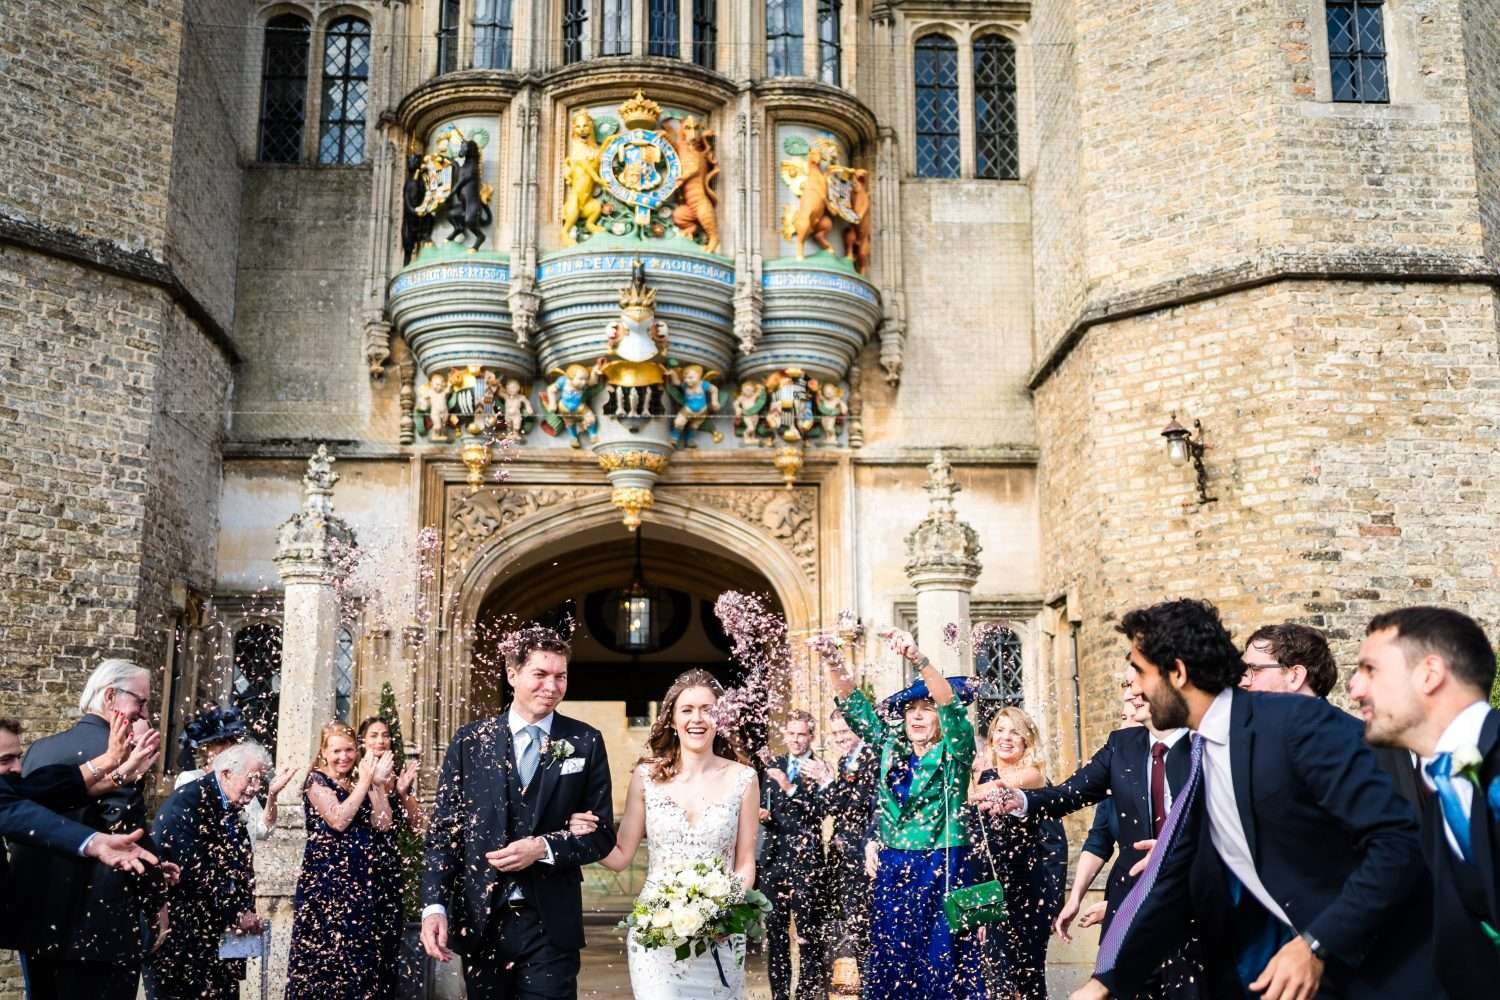 A couple are overwhelmed by confetti thrown by their guests at their wedding at hengrave hall. We see the front door and associated stonework of hengrave hall in the background. 